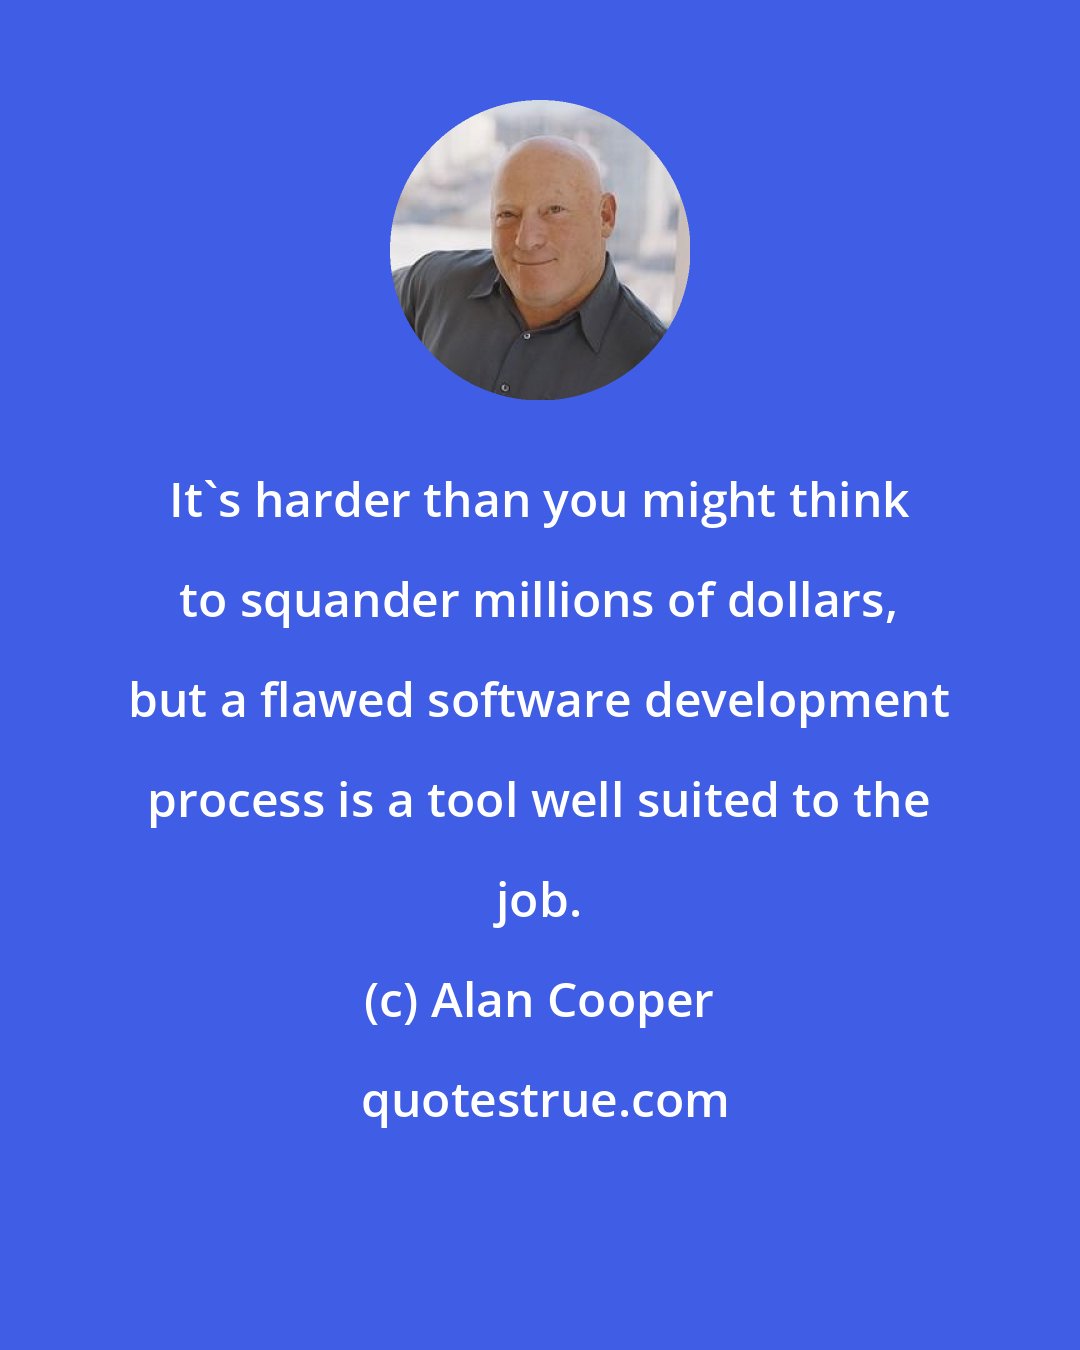 Alan Cooper: It's harder than you might think to squander millions of dollars, but a flawed software development process is a tool well suited to the job.